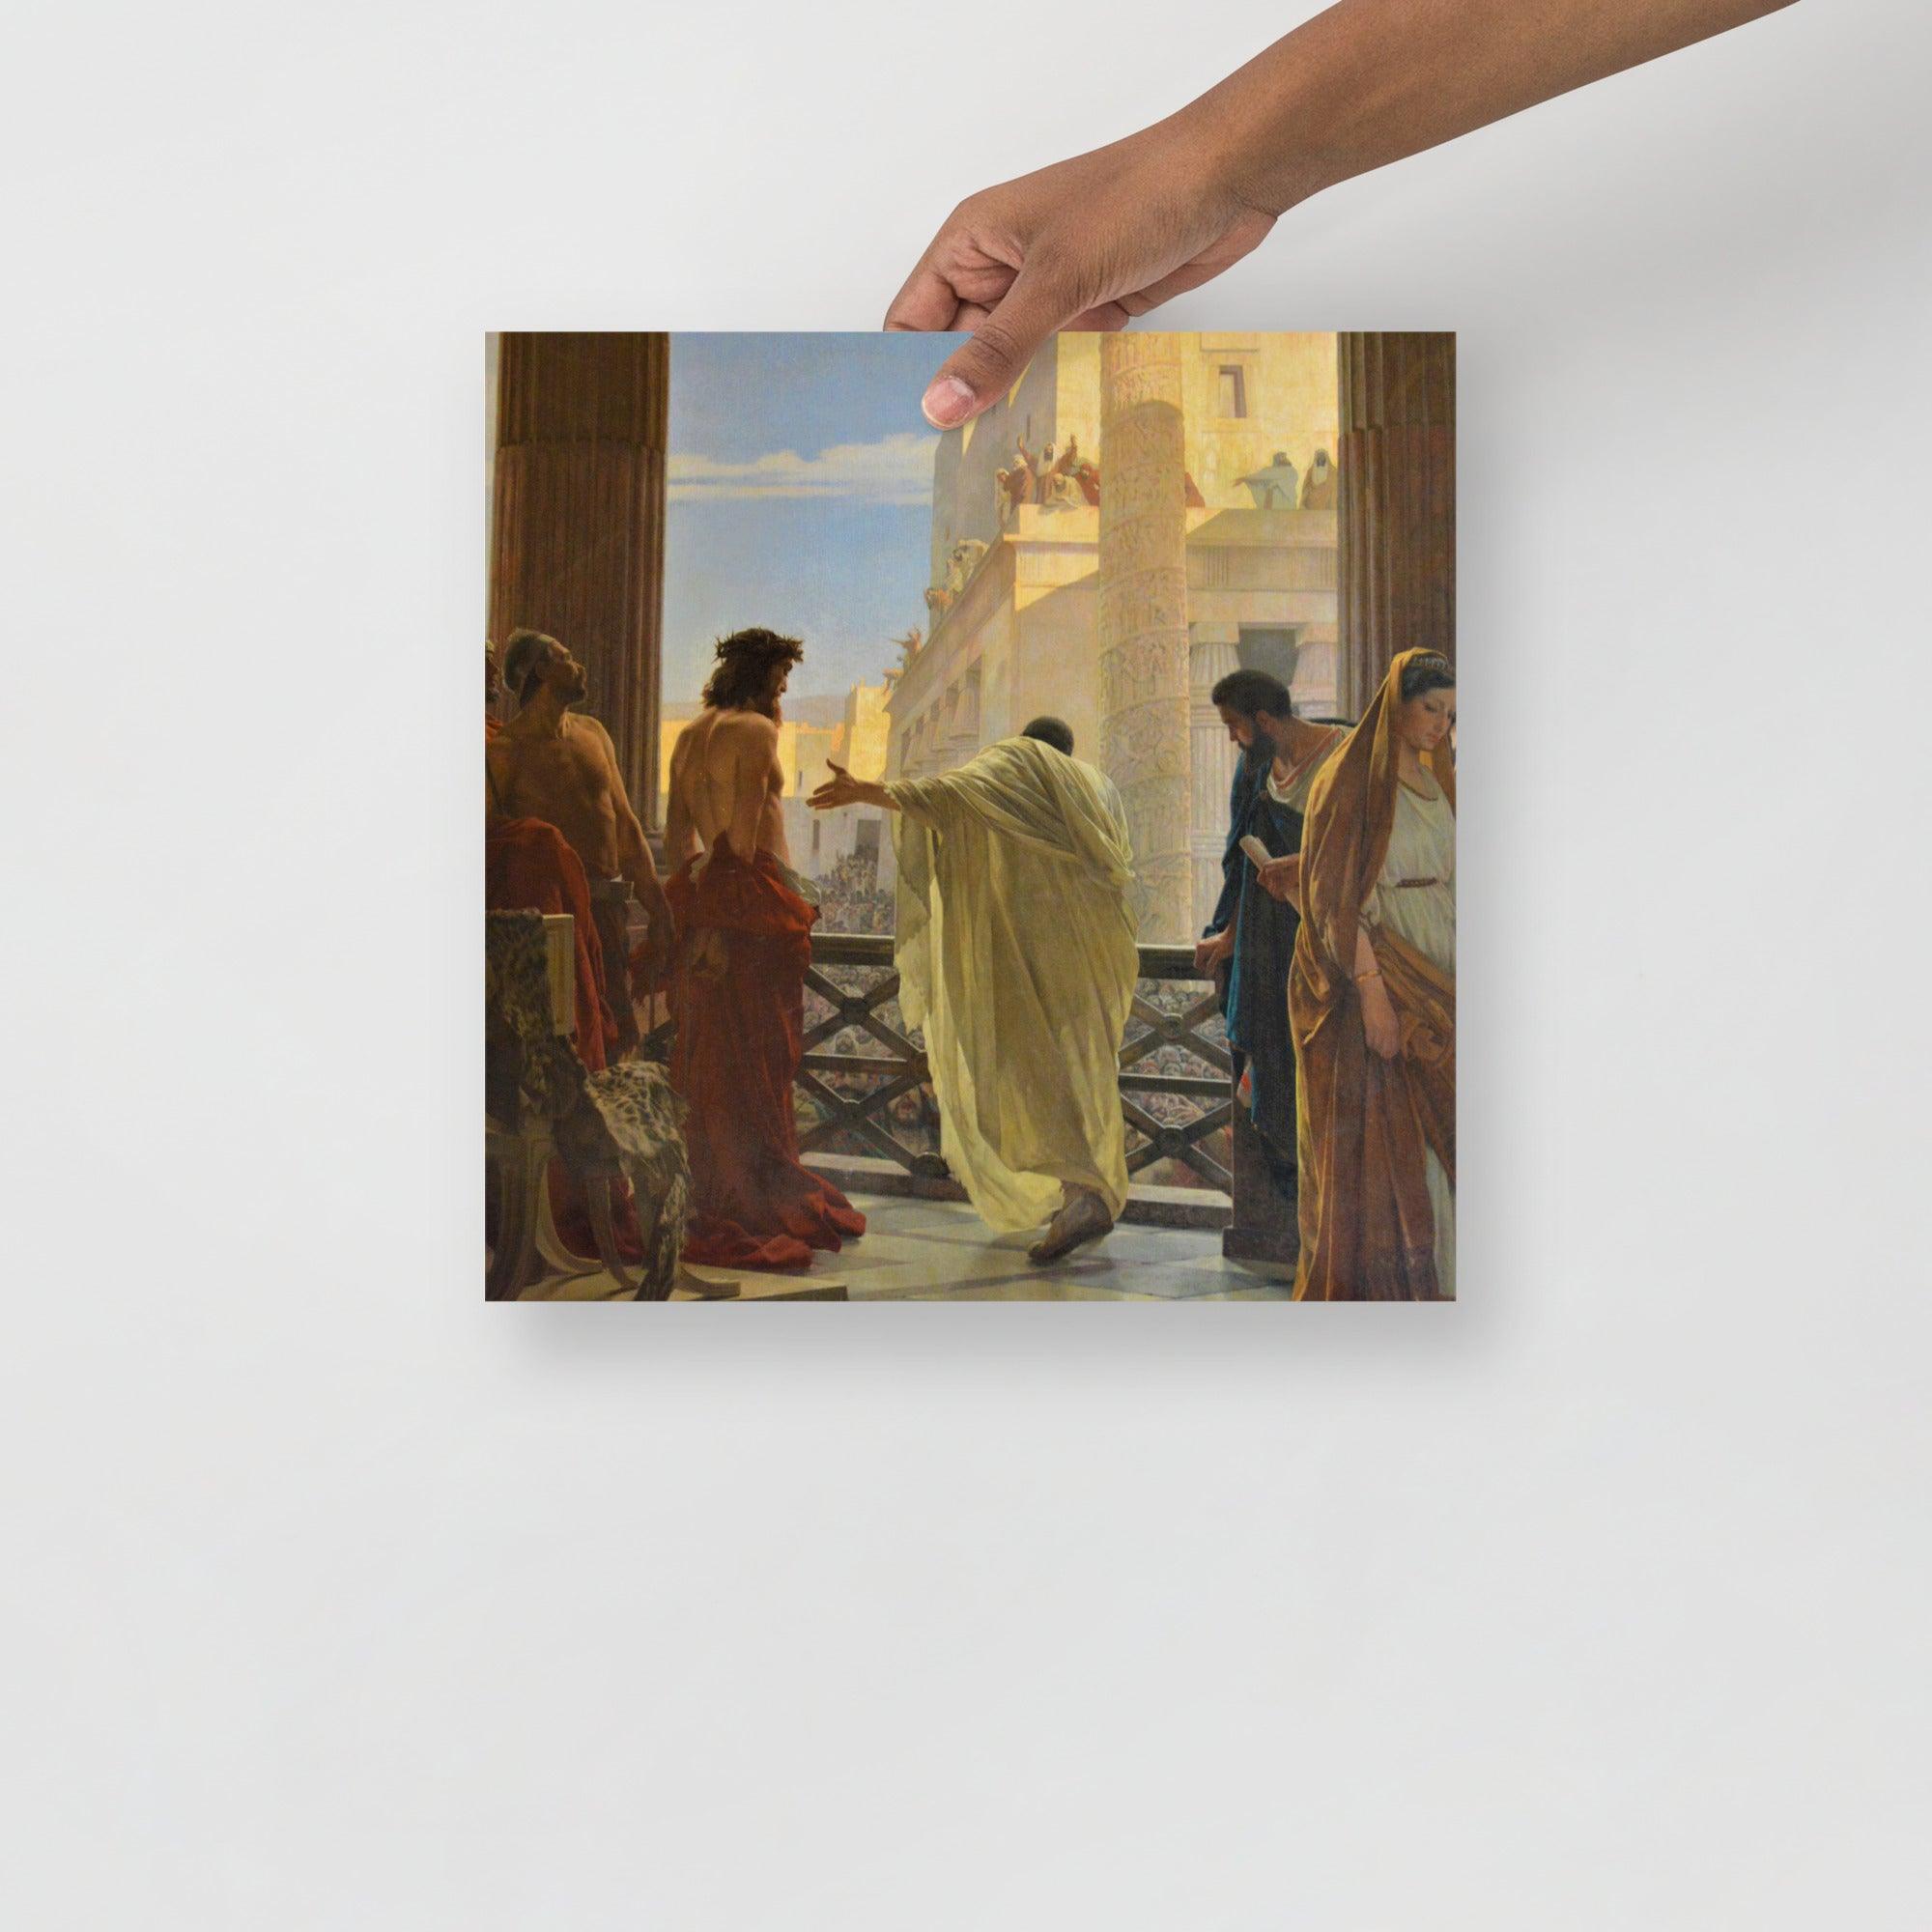 An Ecce Homo poster on a plain backdrop in size 14x14”.